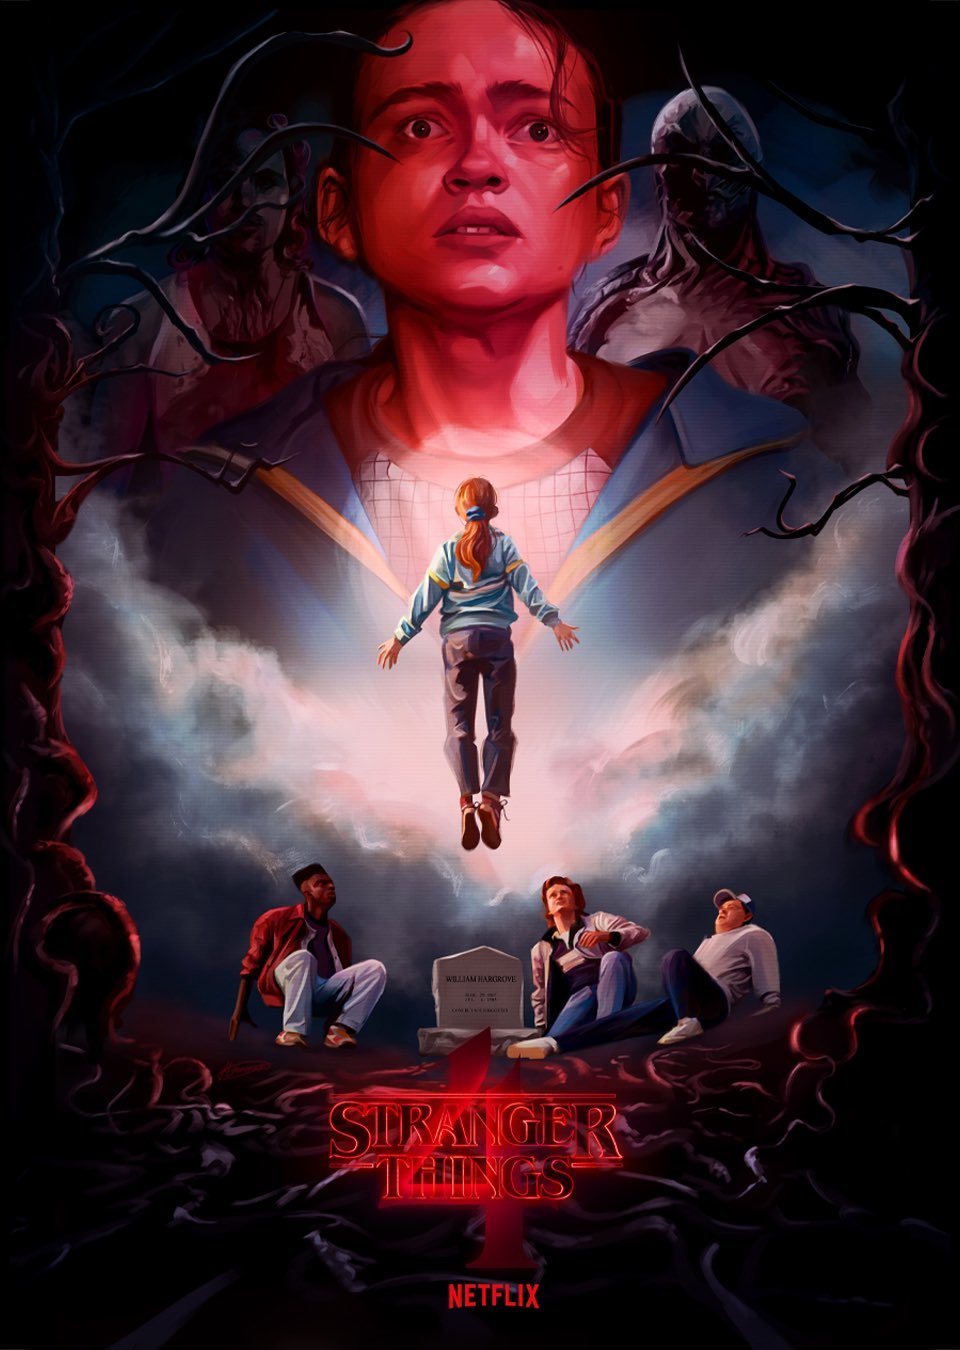 Stranger Things 4 - Created by Hannah Gillingham You can follow the artist on Instagram and Twitter.